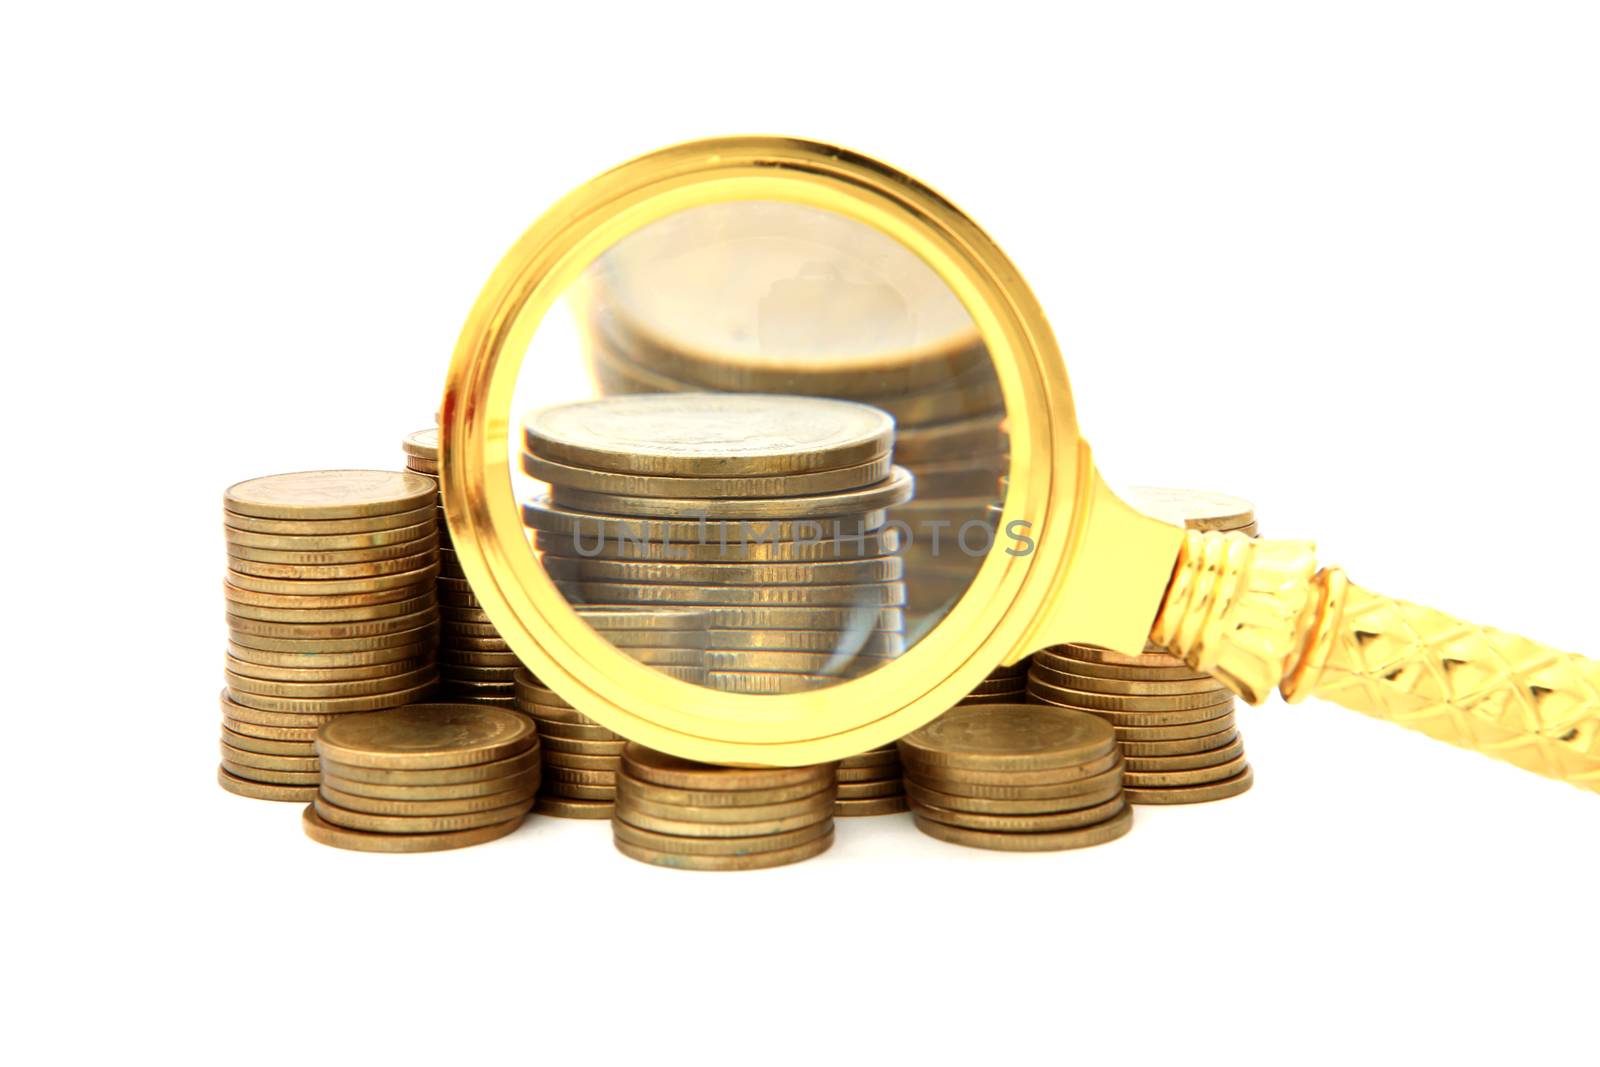 Magnifier and gold coins. On a white background.